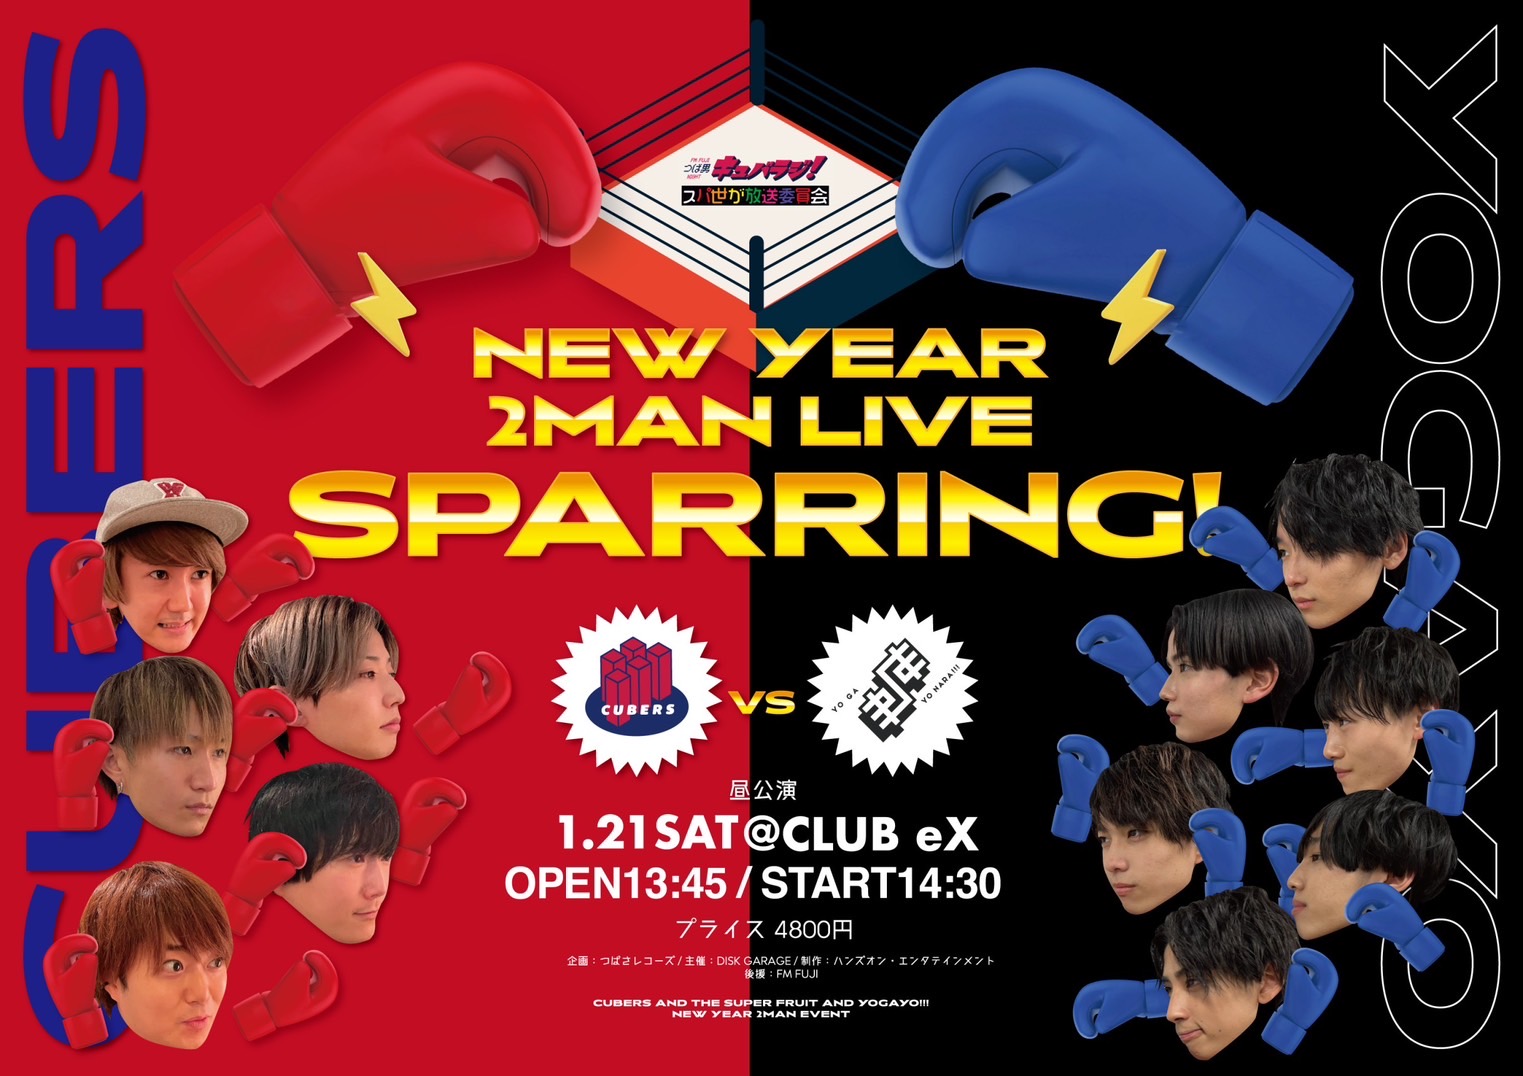 【NEWS】2023年1月21日(土)に”FM FUJI つば男NIGHT presents”「New Year 2Man Live Sparring  CUBERS × 世が世なら!!!」開催決定！